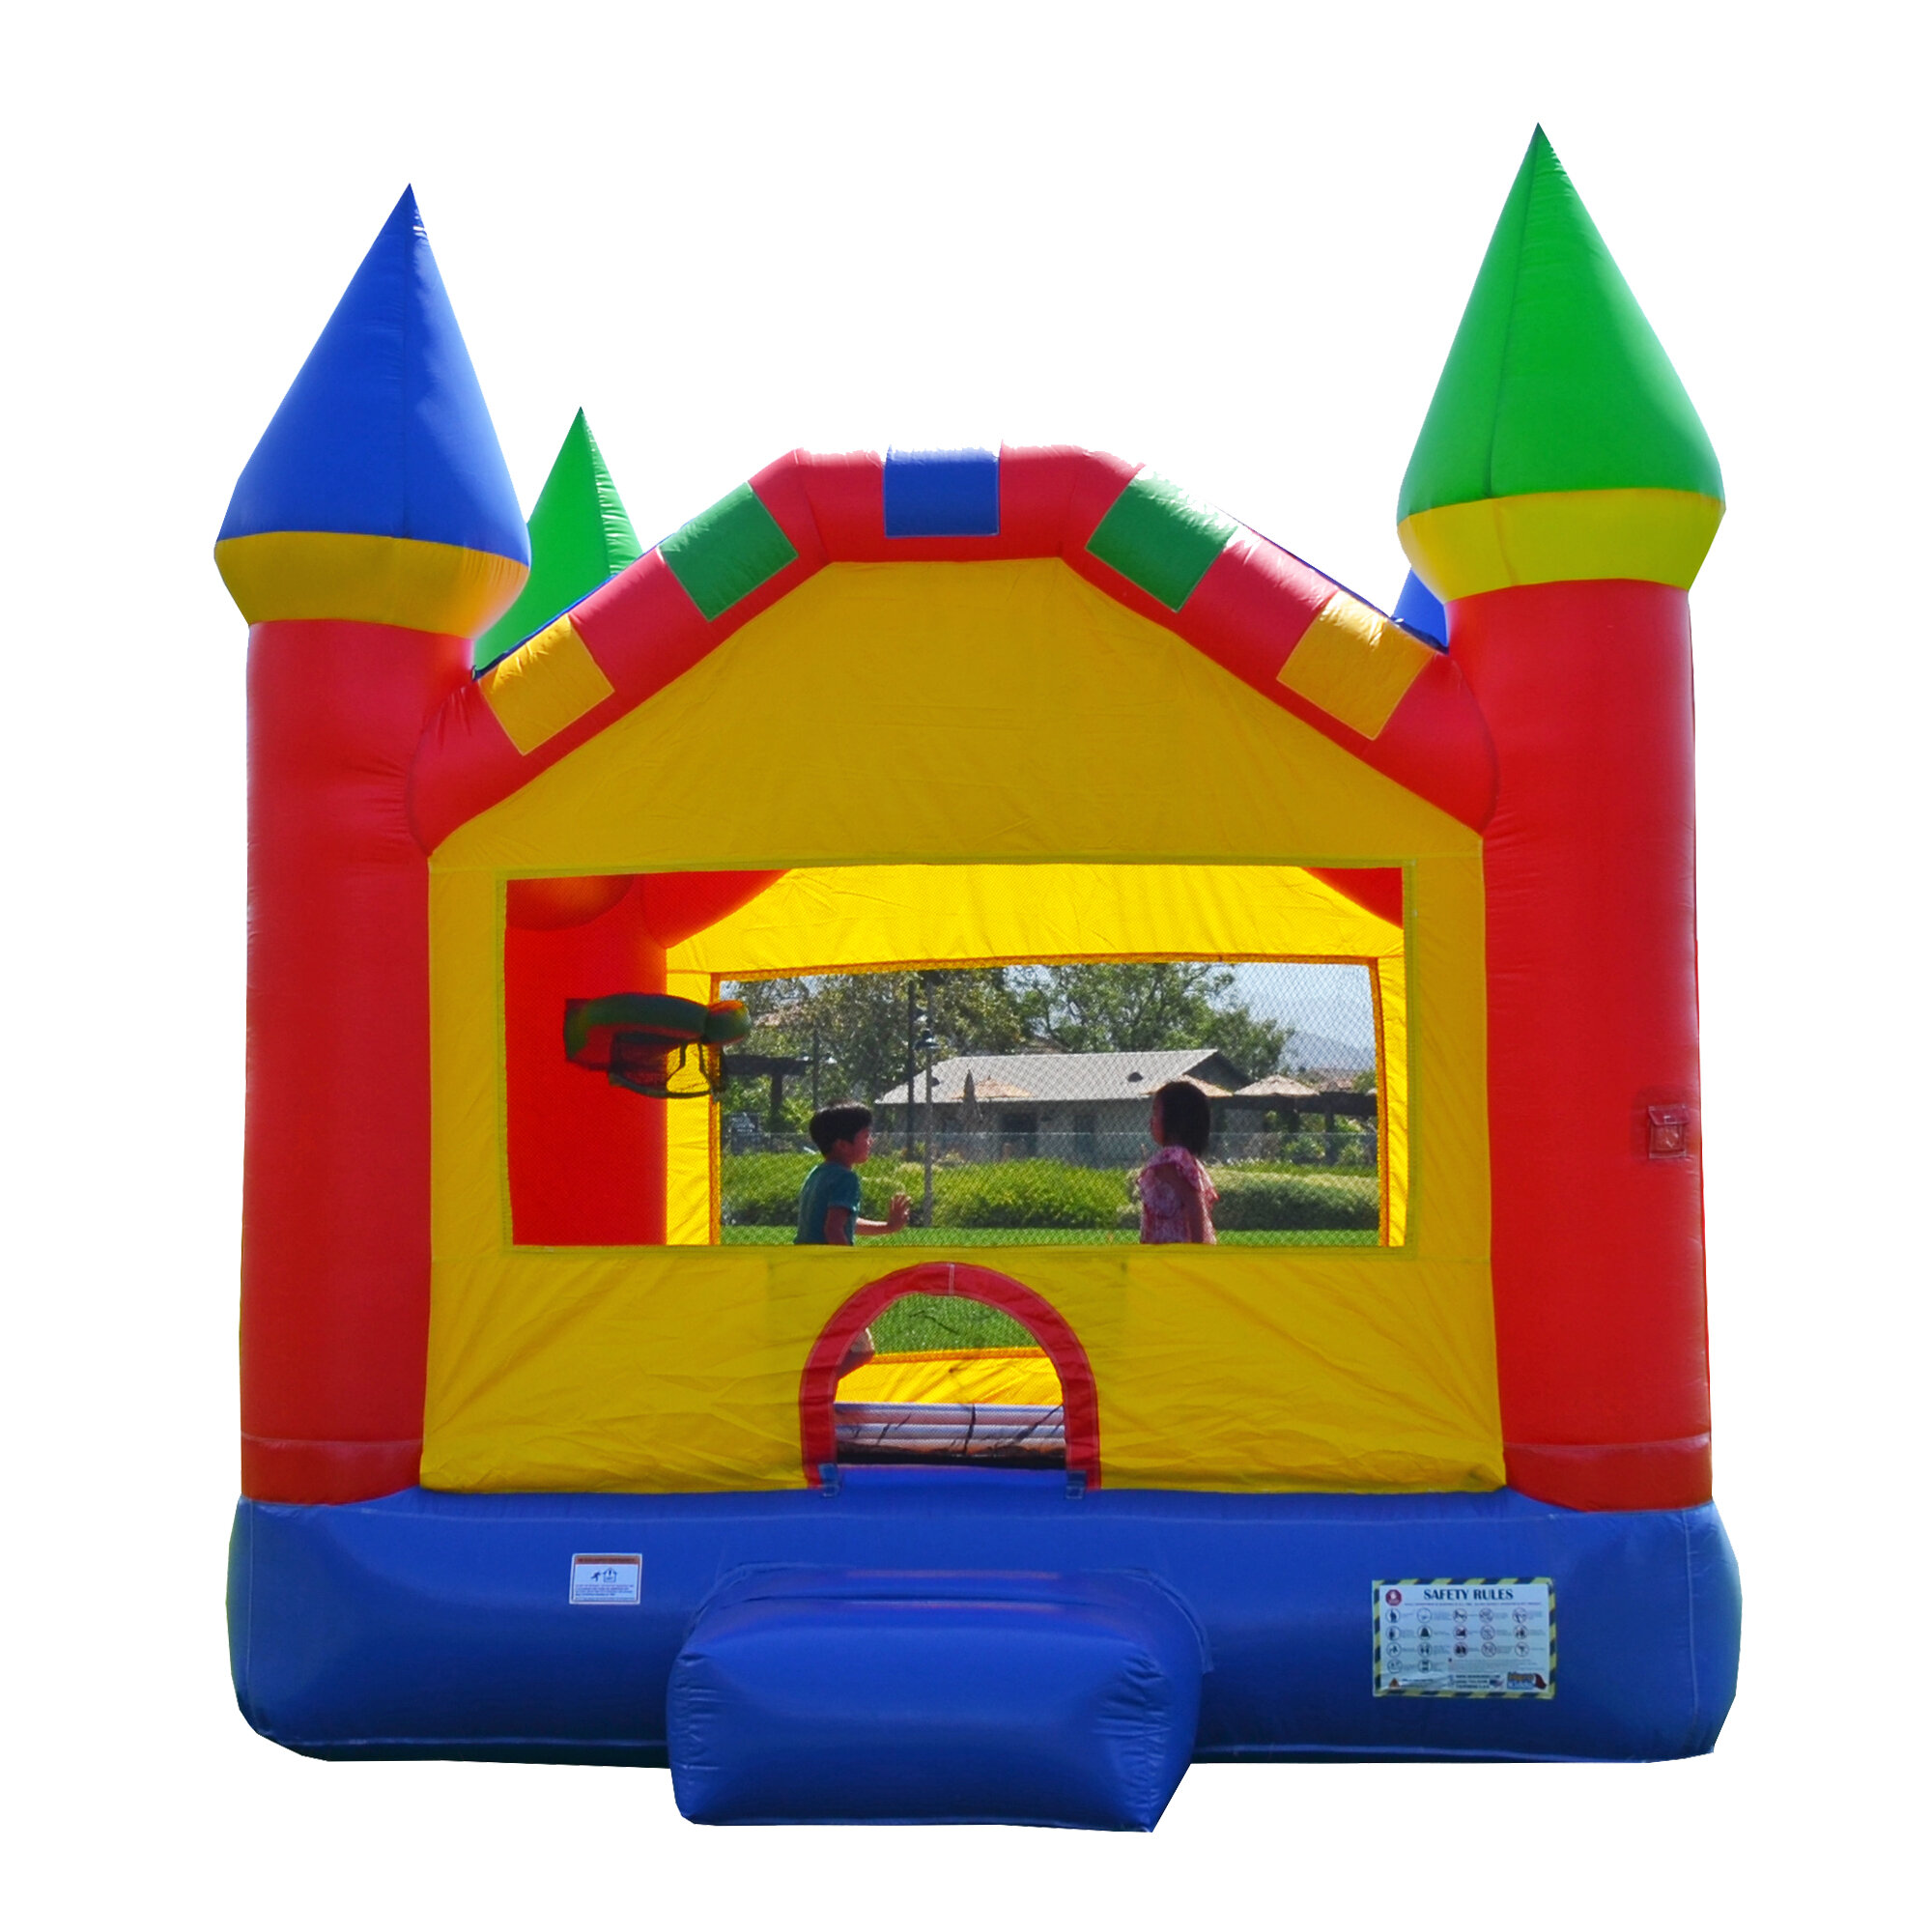 ACTION AIR Bounce House Jumping House for Kids Great Gift for Thanksgiving and Christmas Bounce House with Blower 9515 Inflatable Bounce House with 30 Pit Ball 